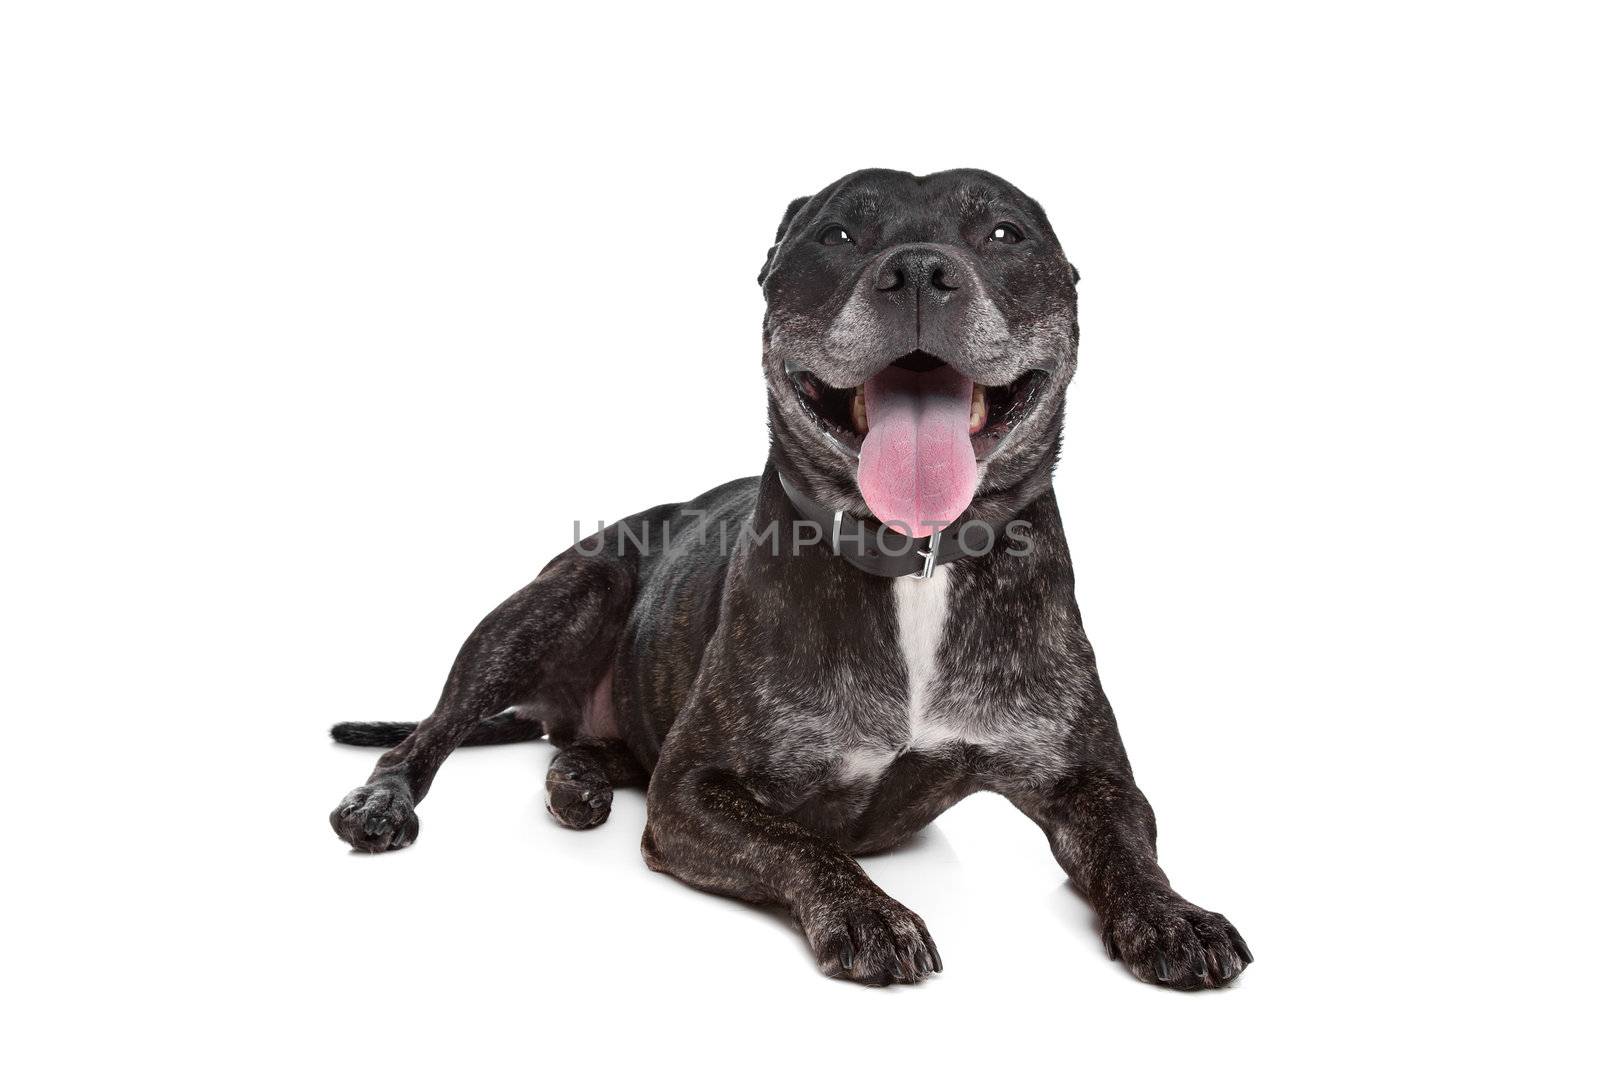 Staffordshire Bull Terrier in front of a white background